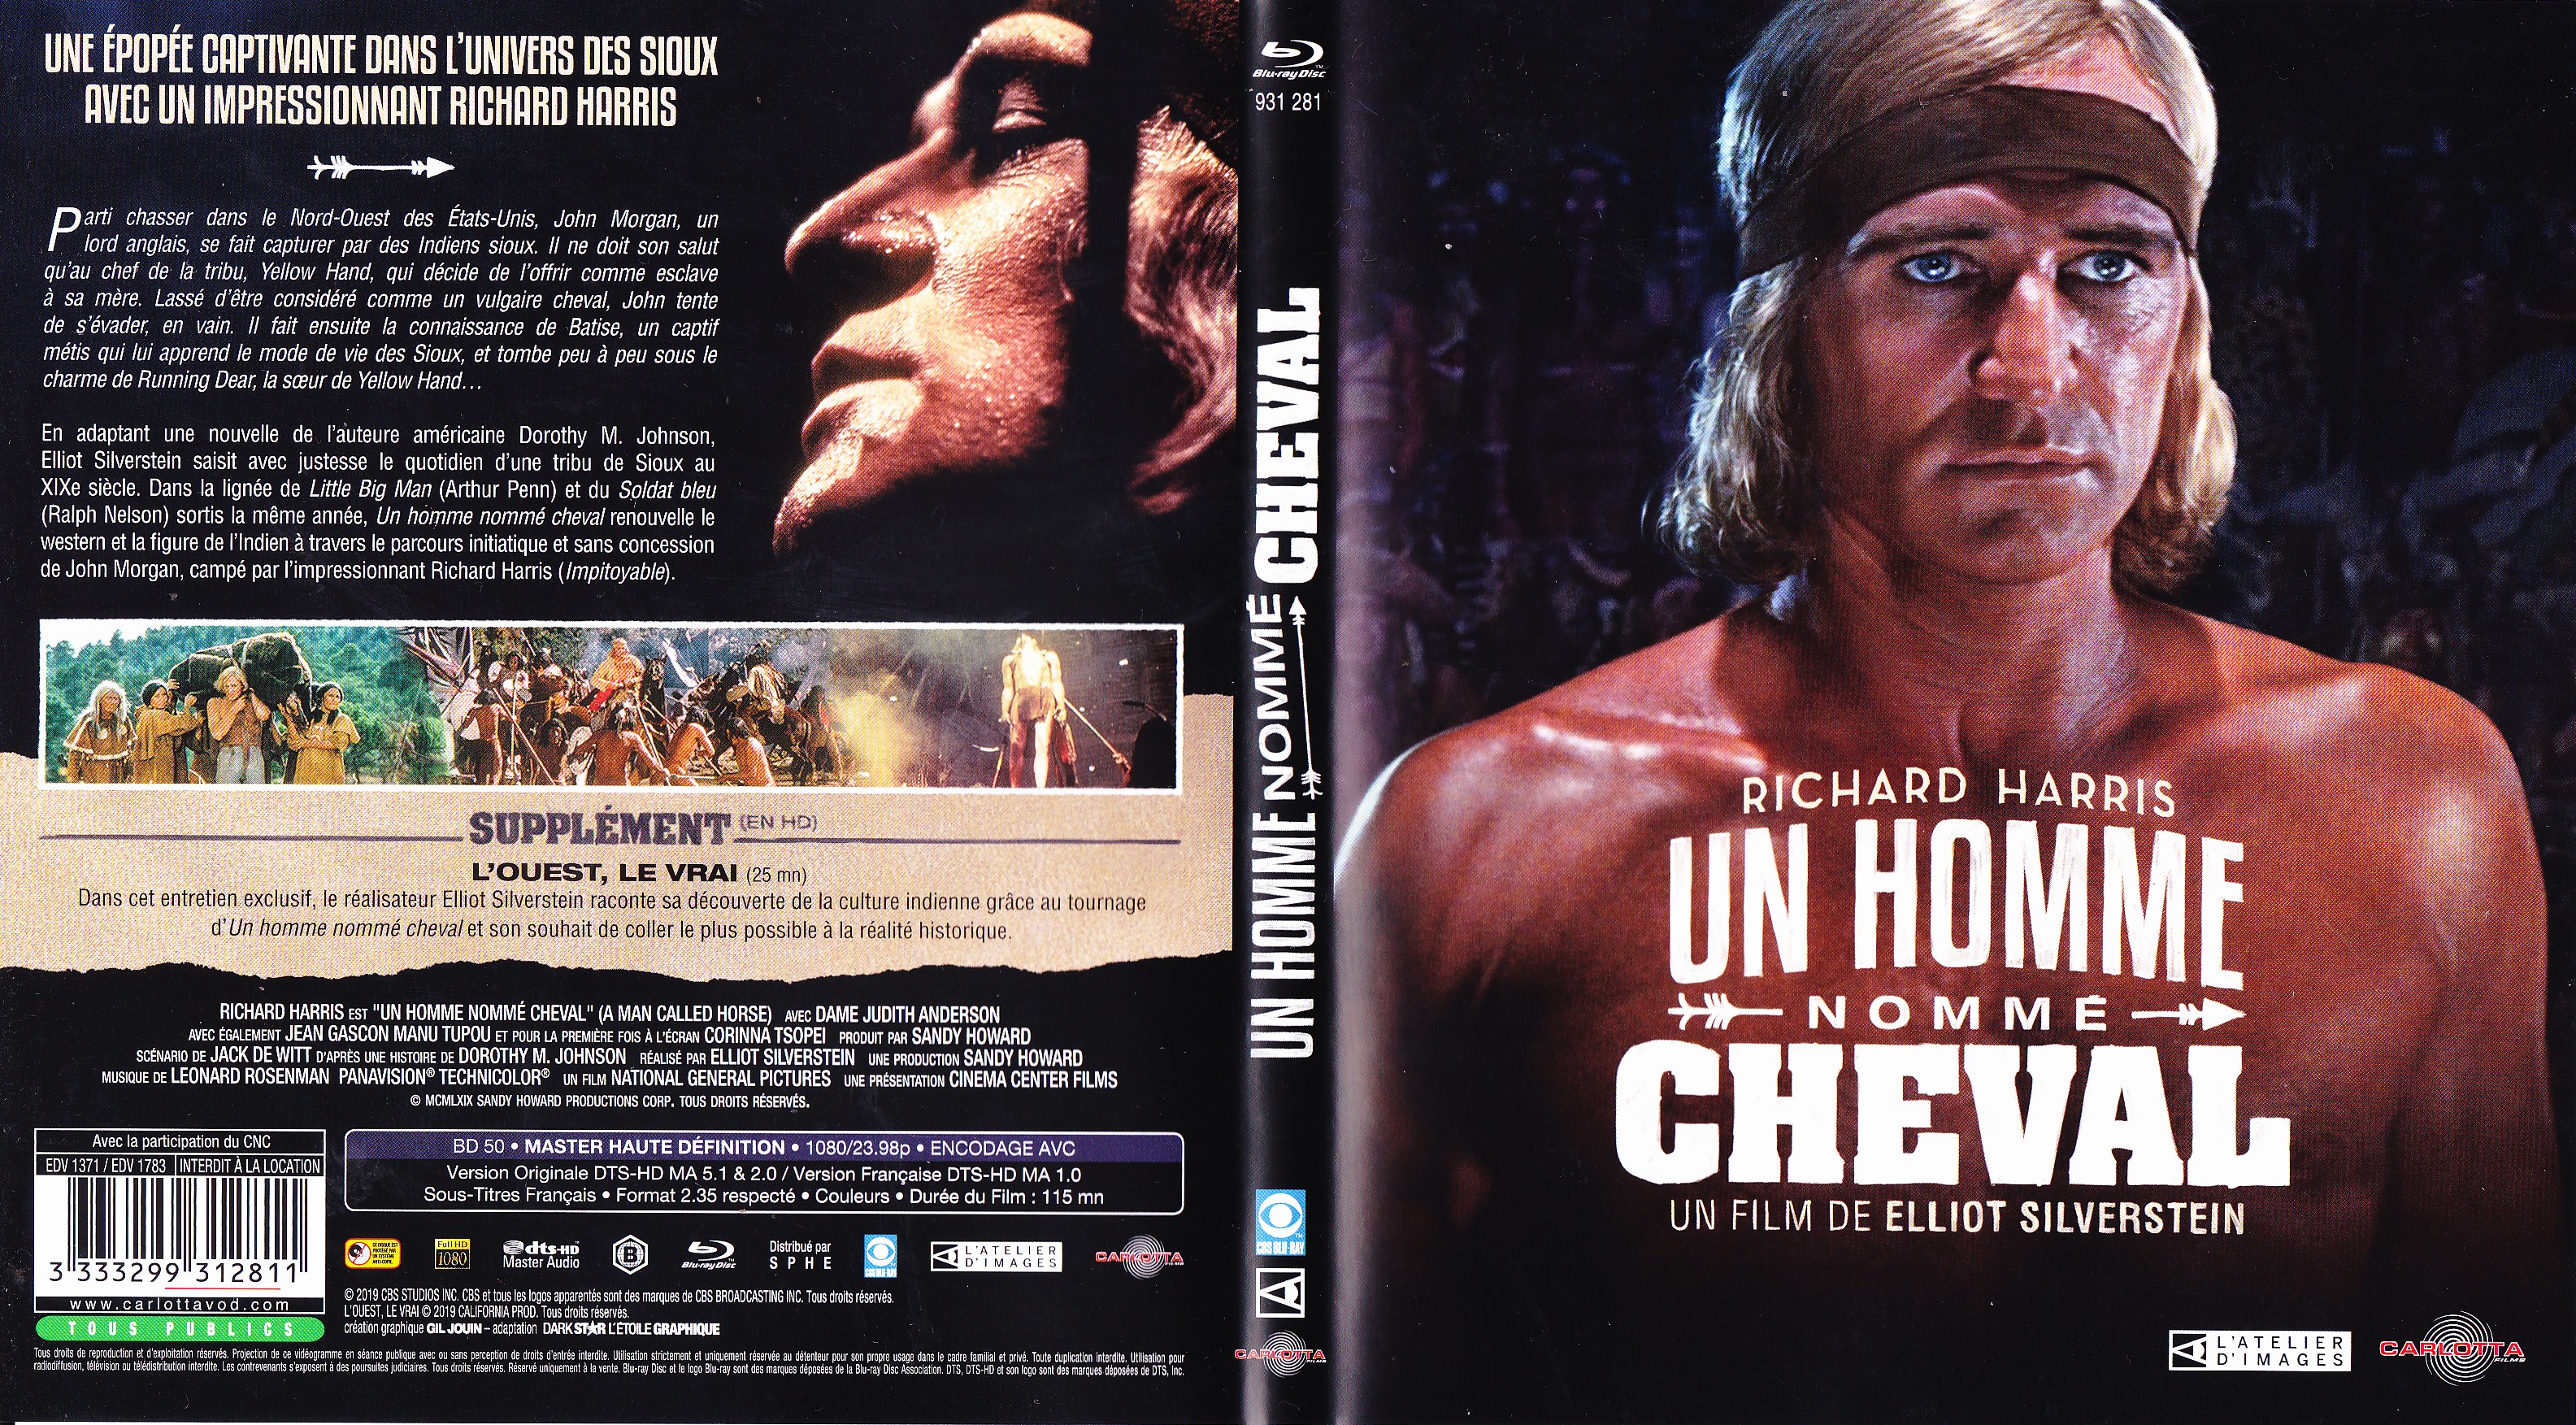 Jaquette DVD Un homme nomm cheval (BLU-RAY)